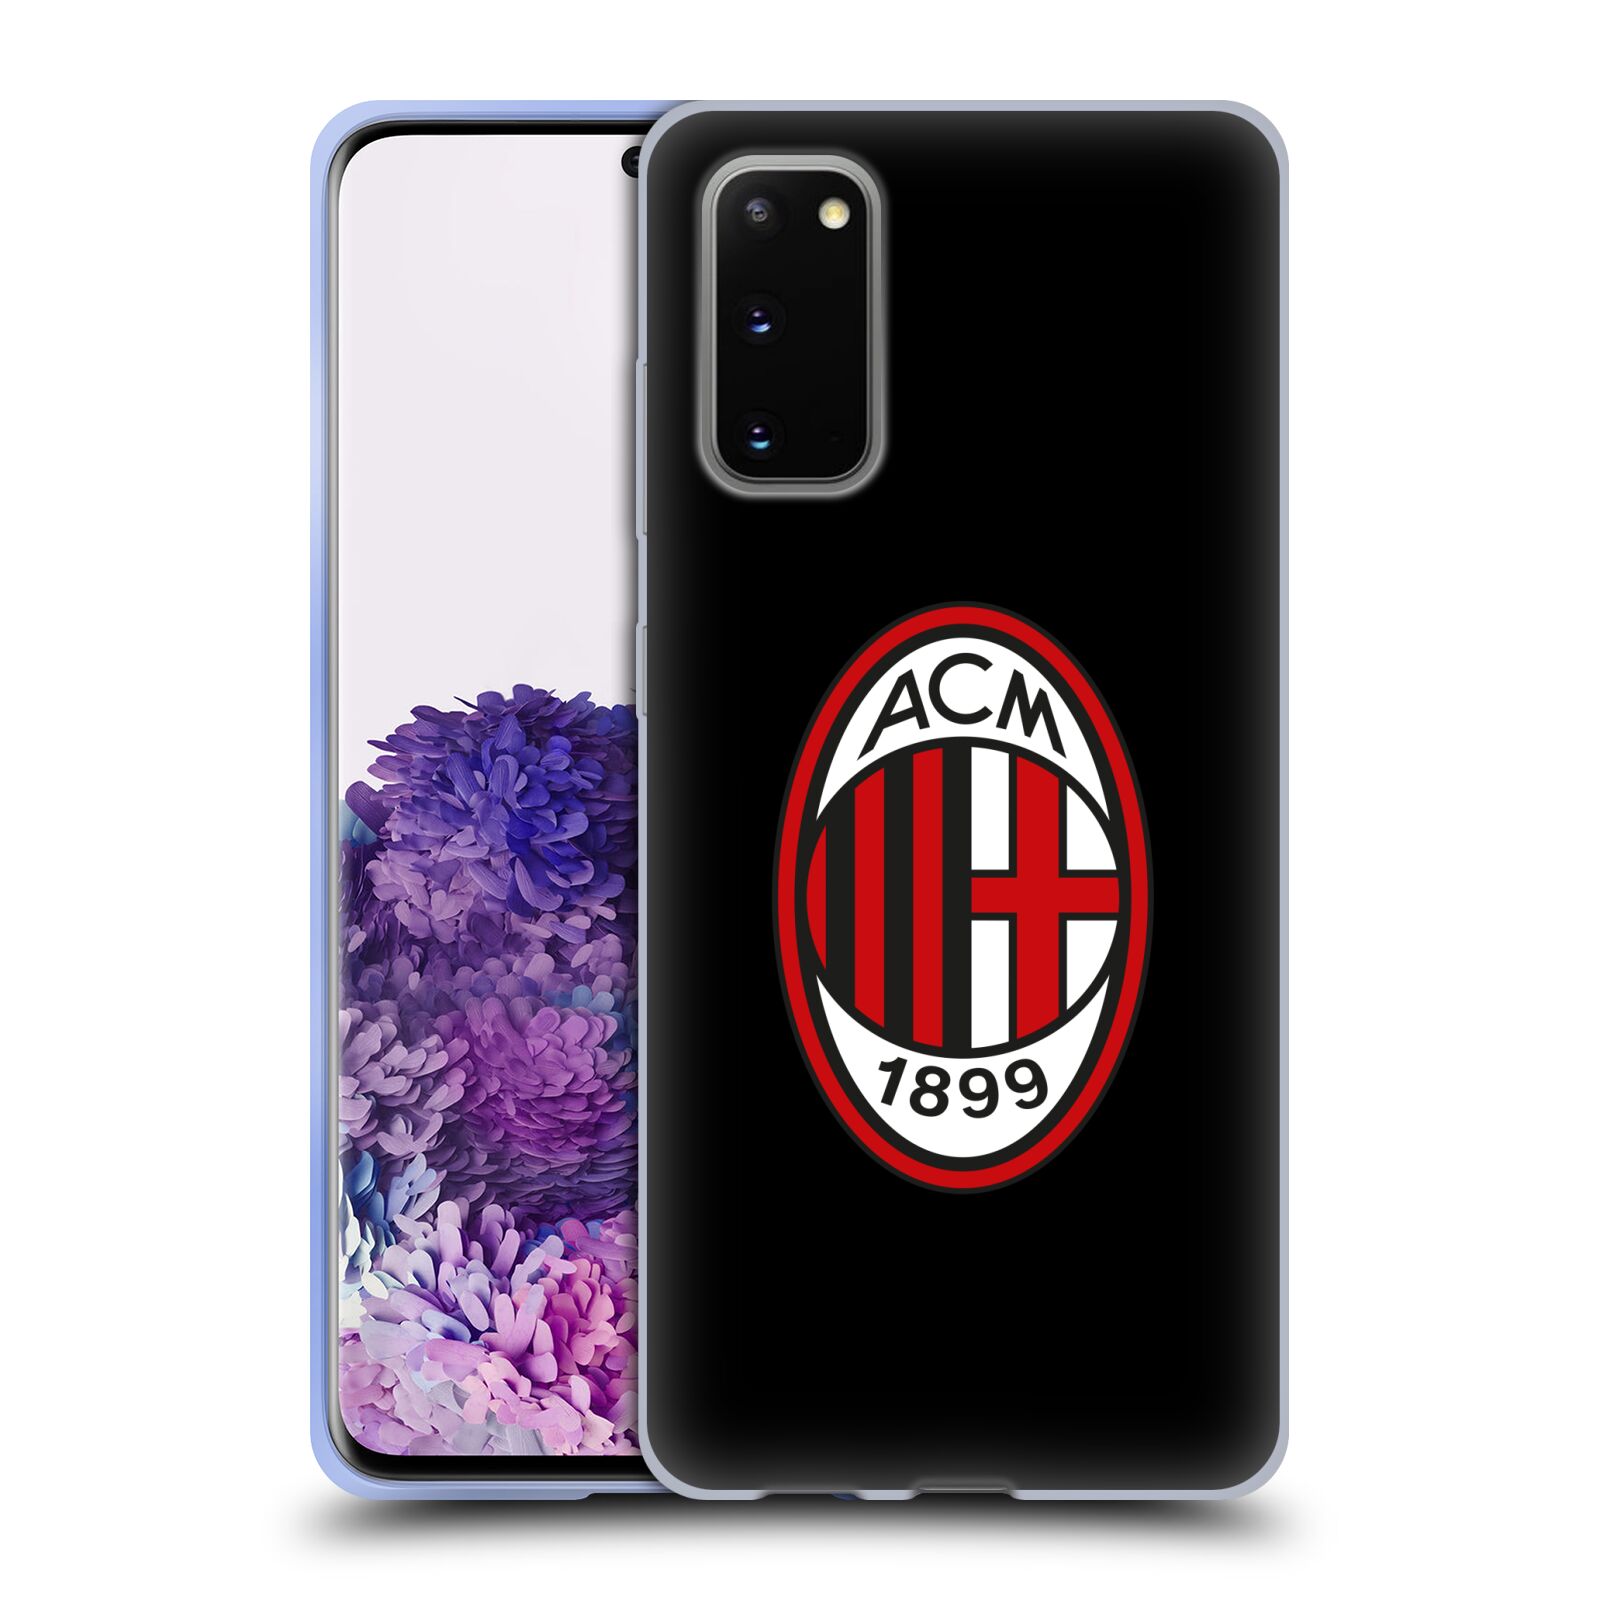 AC Milan Fc Galaxy S3 Hard Mobile Phone Case Cover Red Black Stripe 